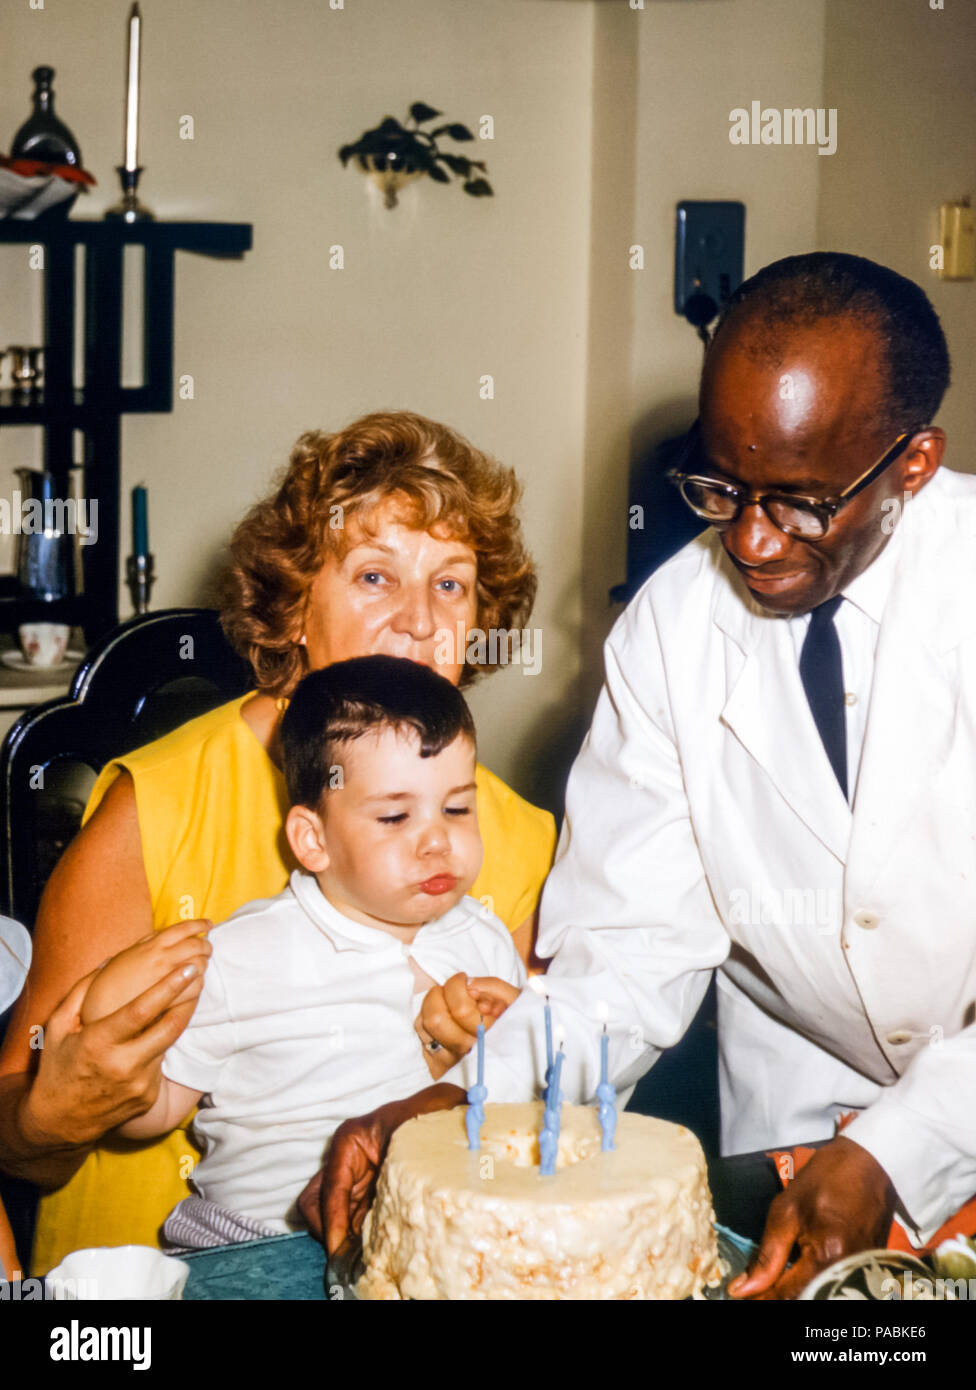 Child's birthday in the 1960s.  The 4 year old little boy is blowing out candles on a large birthday cake. He is sitting on his grandmother's lap as a black butler in a white jacket serves the birthday cake, USA Stock Photo